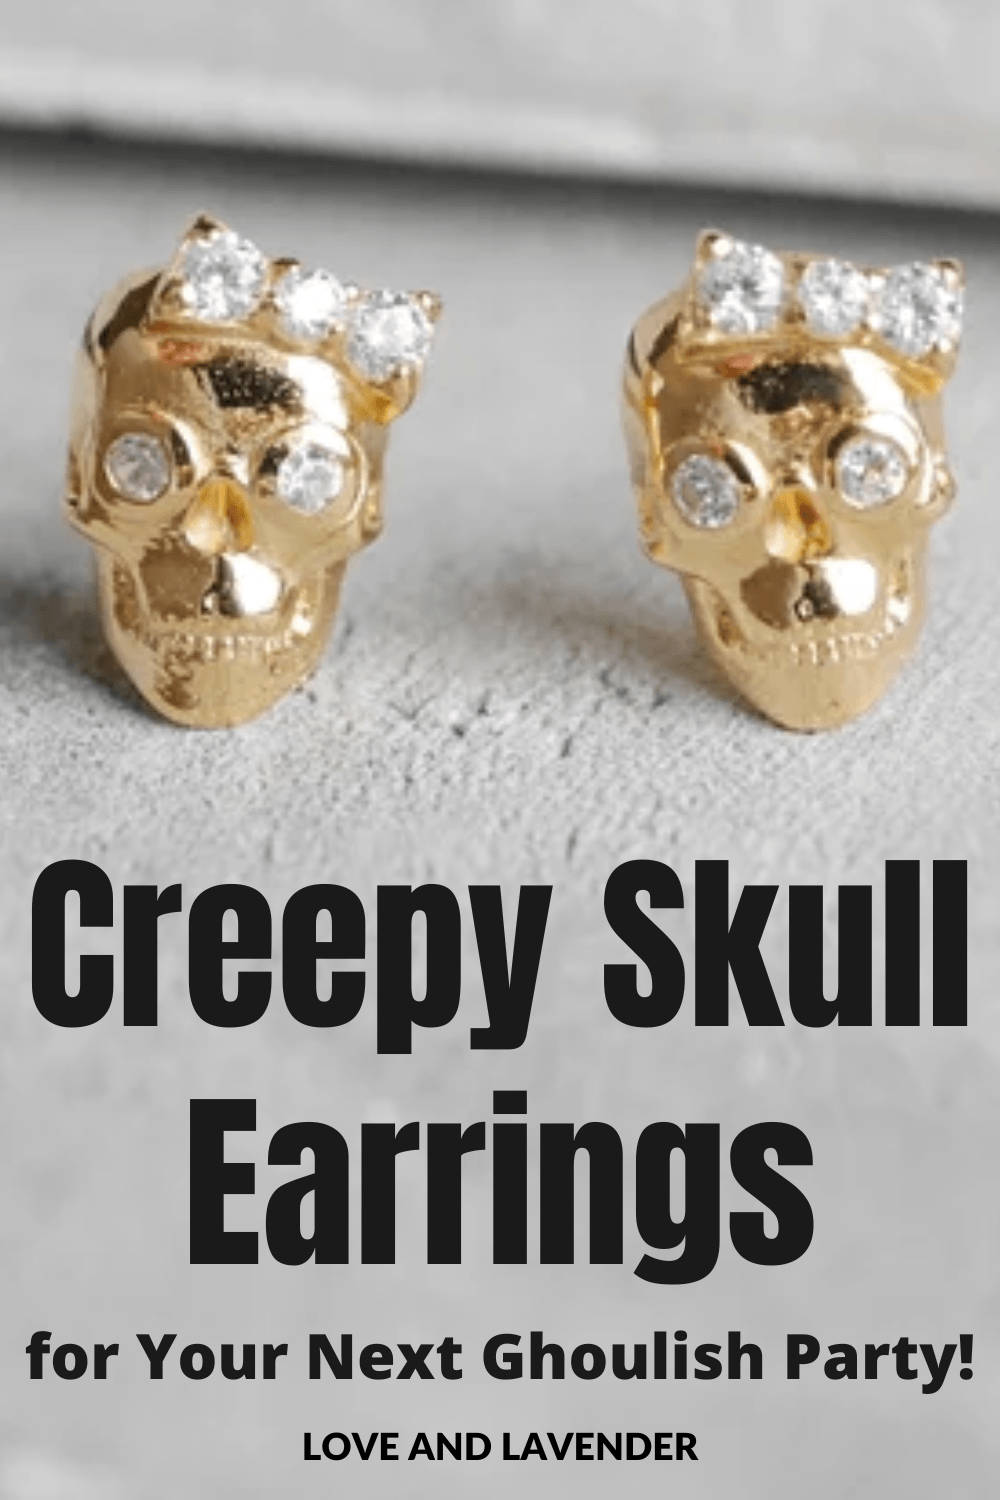 12 Skull Earrings to Match your Style